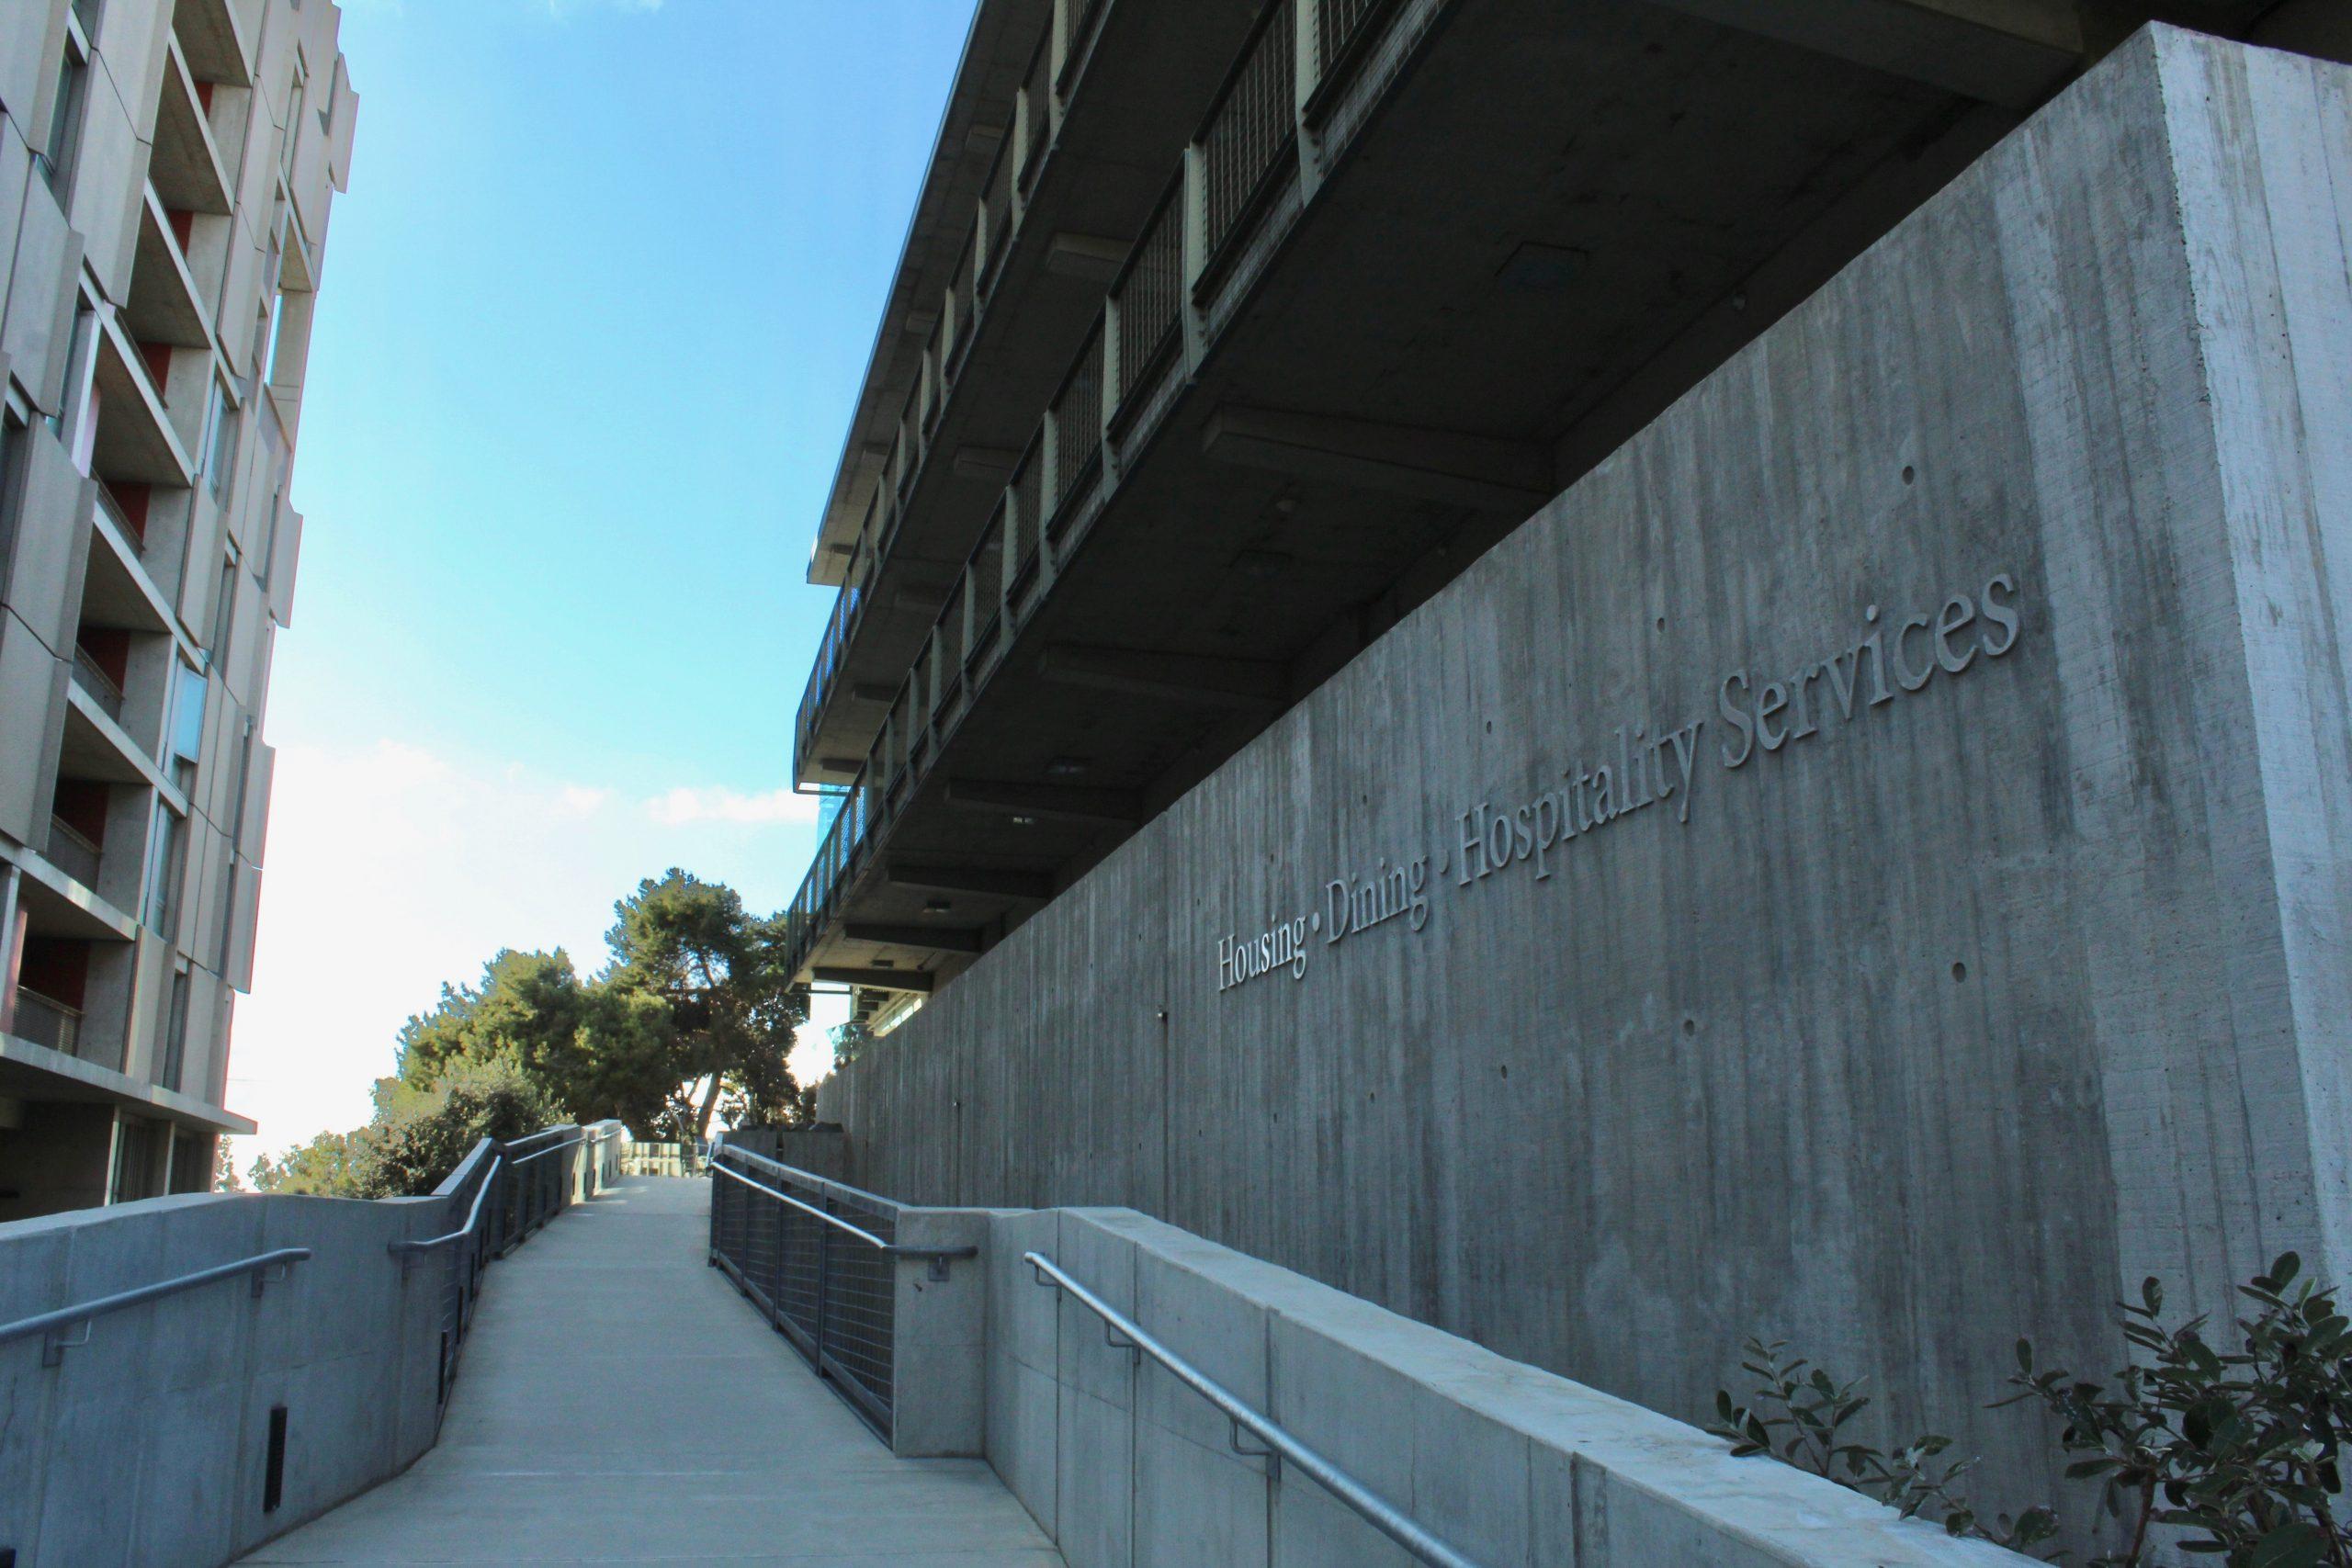 UCSD Offers Short-Term Summer Residences to Students with Housing Insecurities